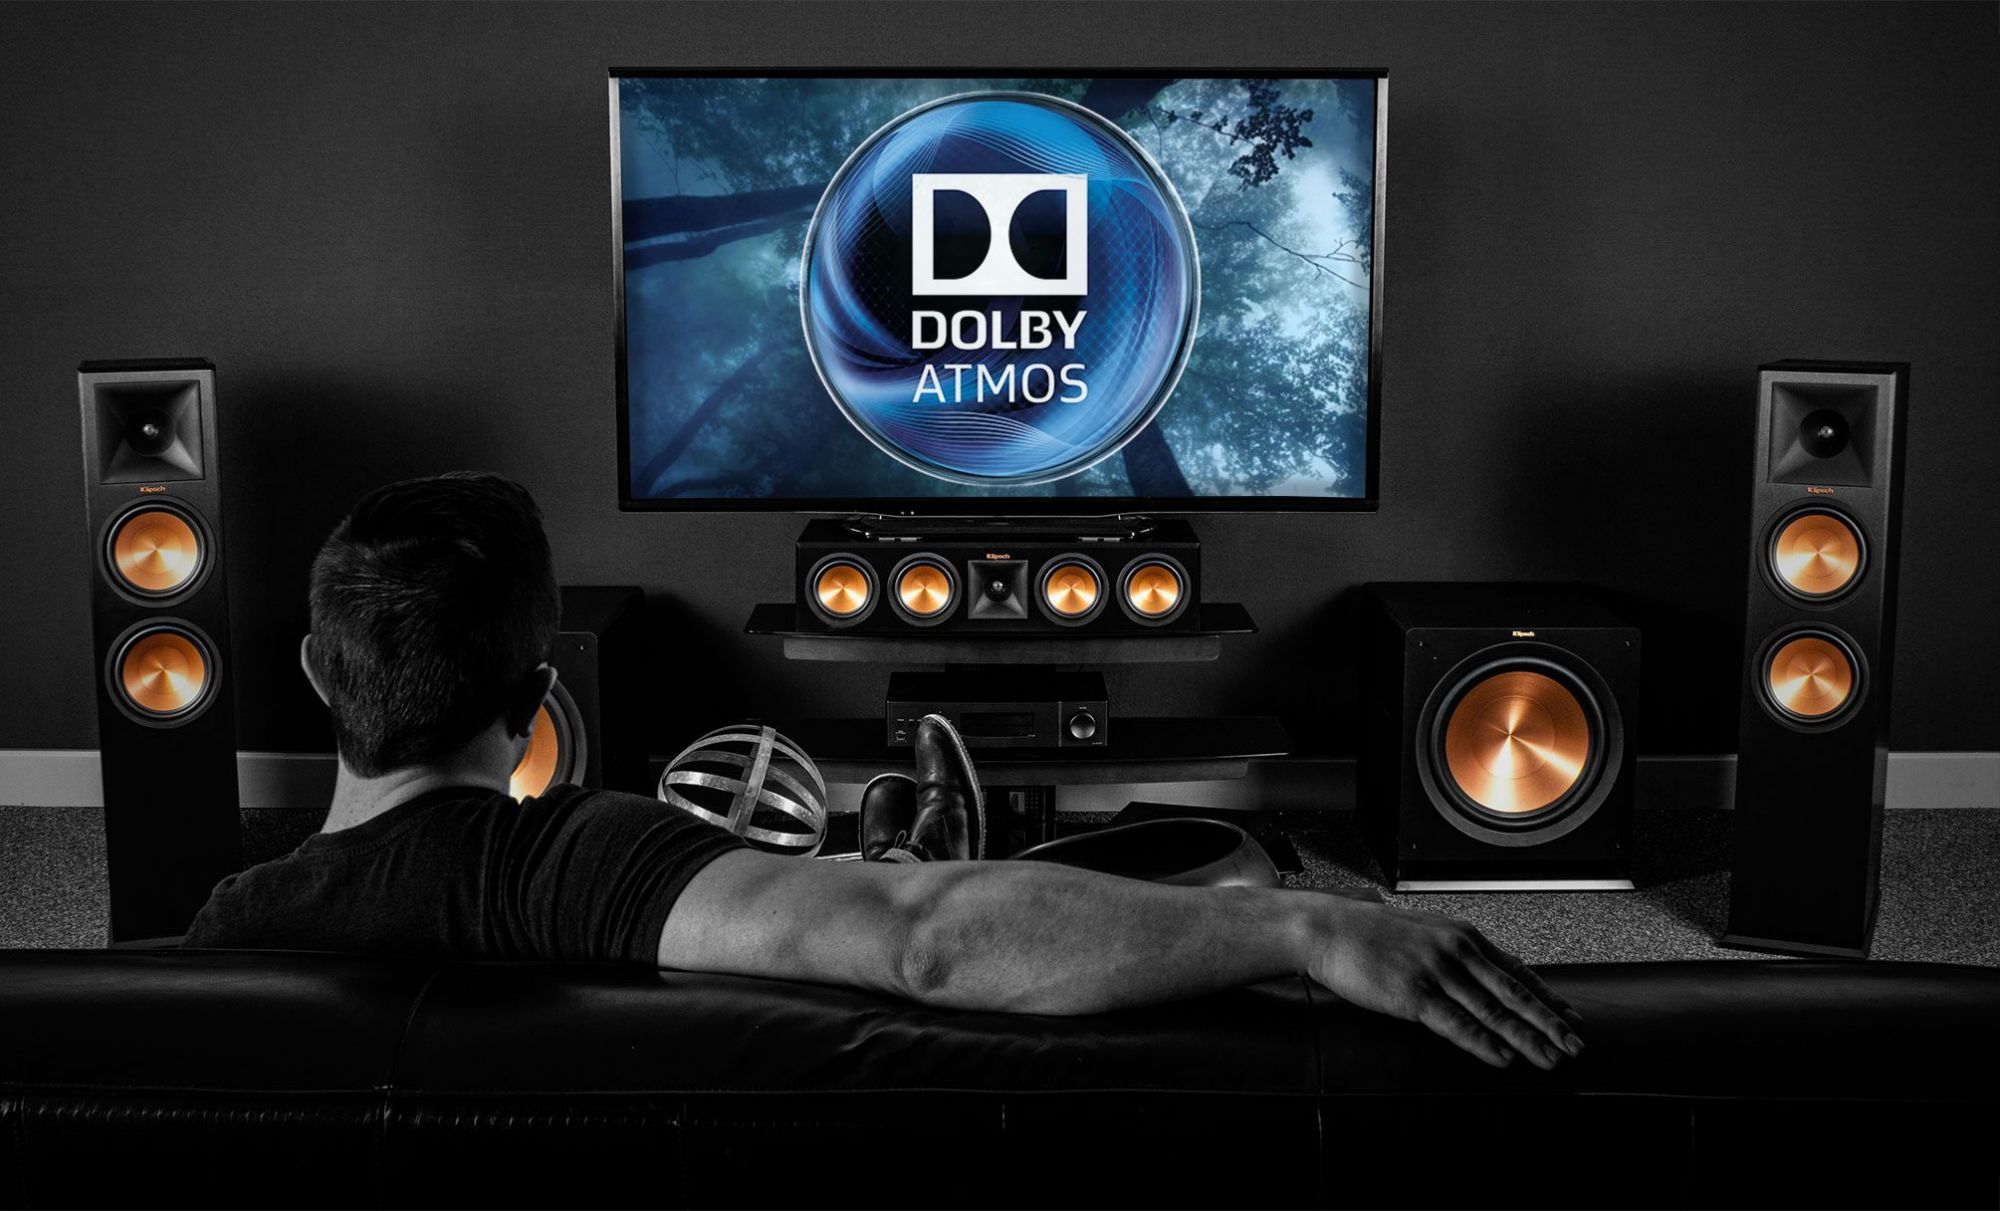 Can I watch movies with enhanced audio formats like Dolby Atmos on Isaimini?